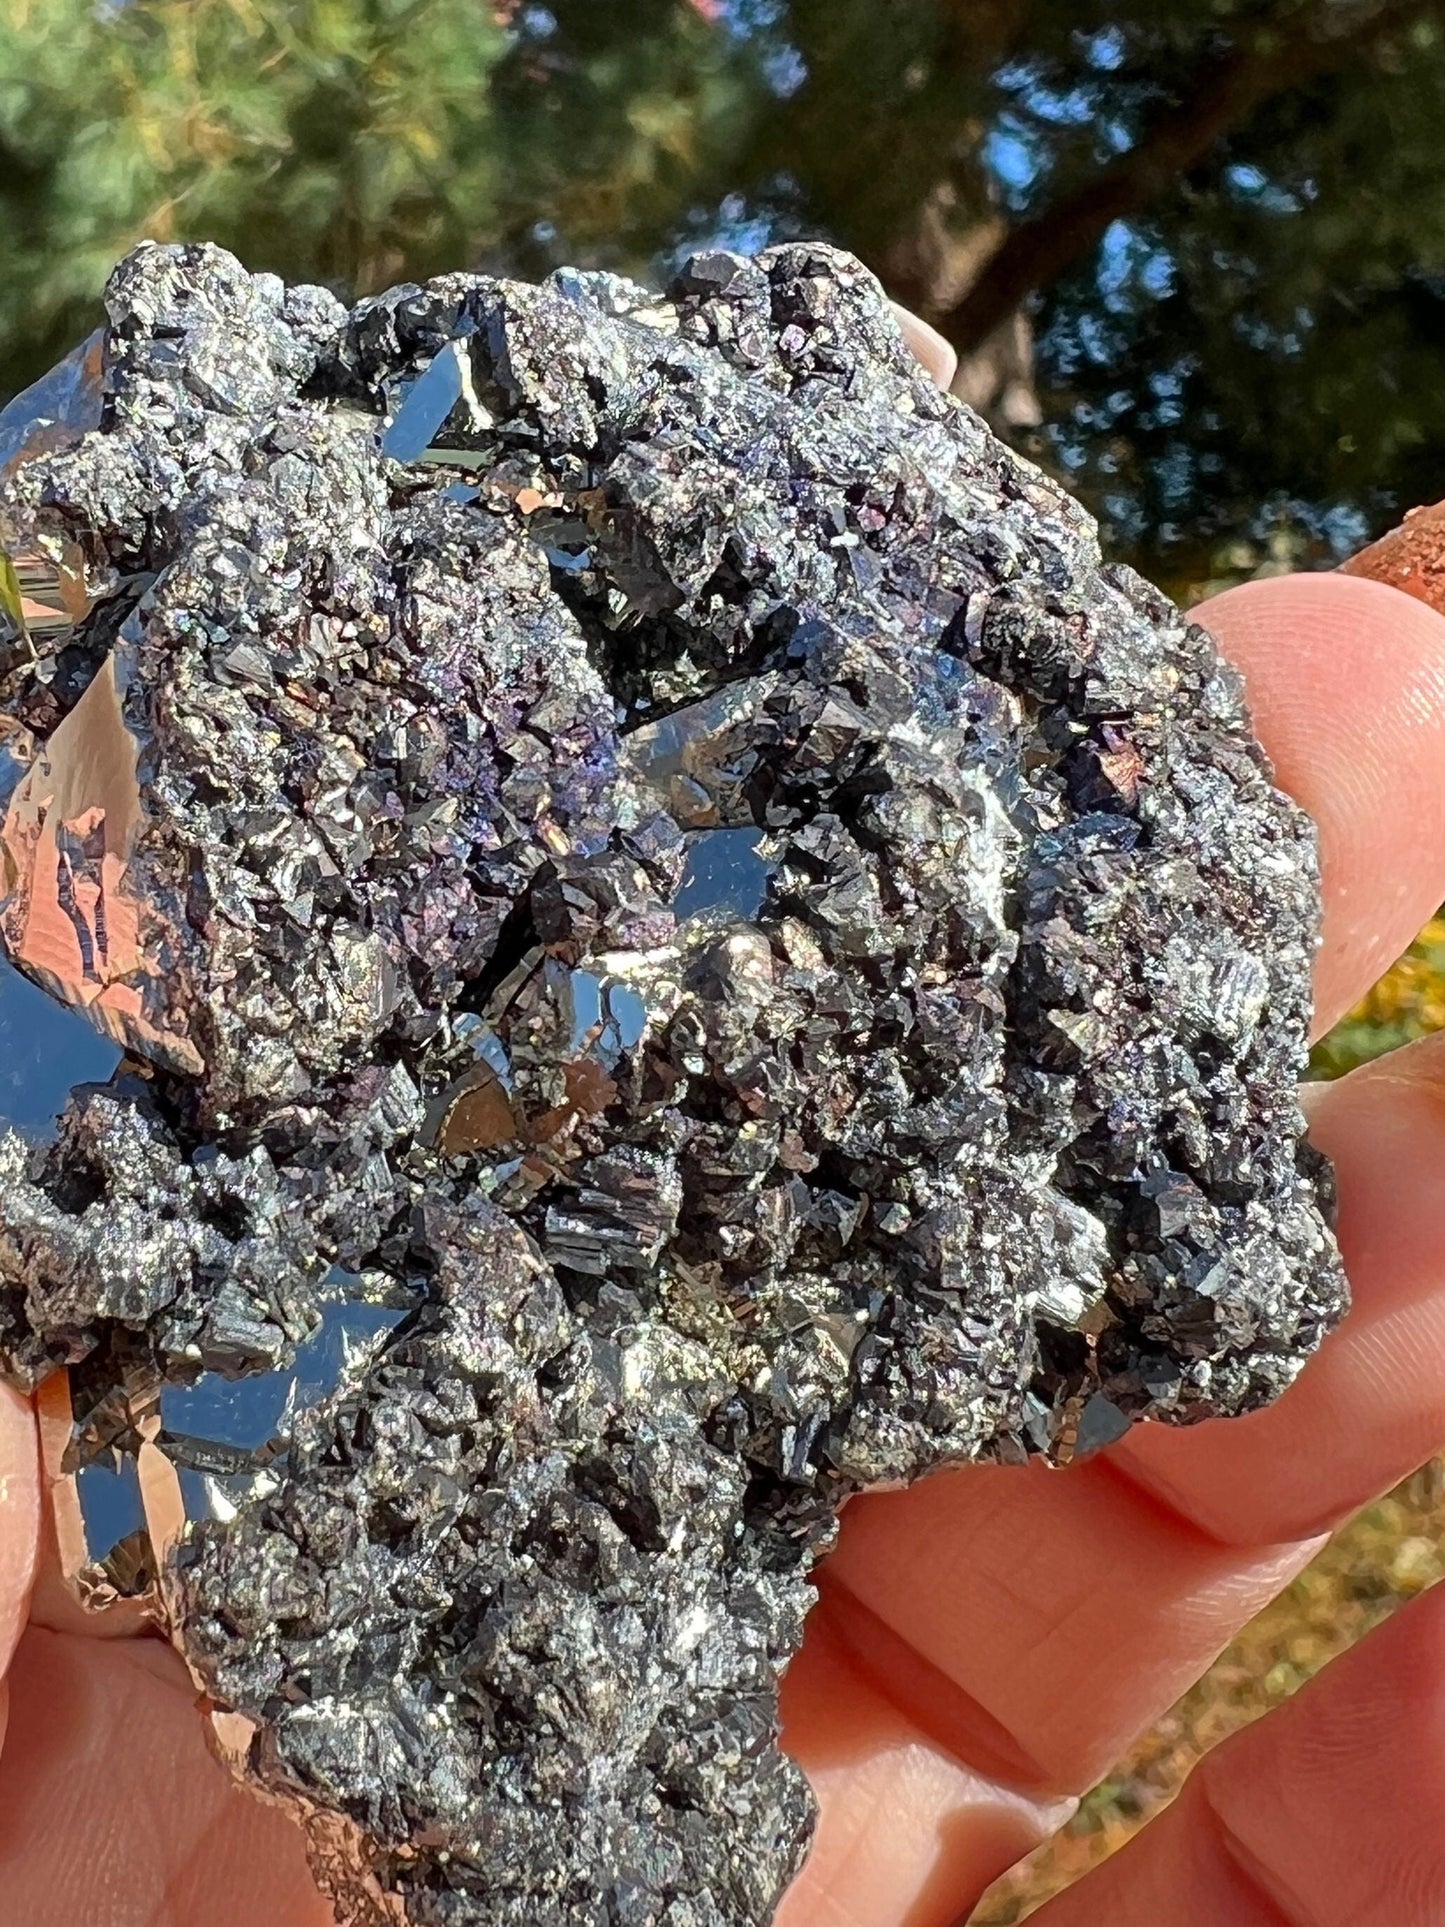 Sparkly Octahedral Pyrite Specimen with Black Sphalerite and Chalcopyrite from Huanzala, Peru